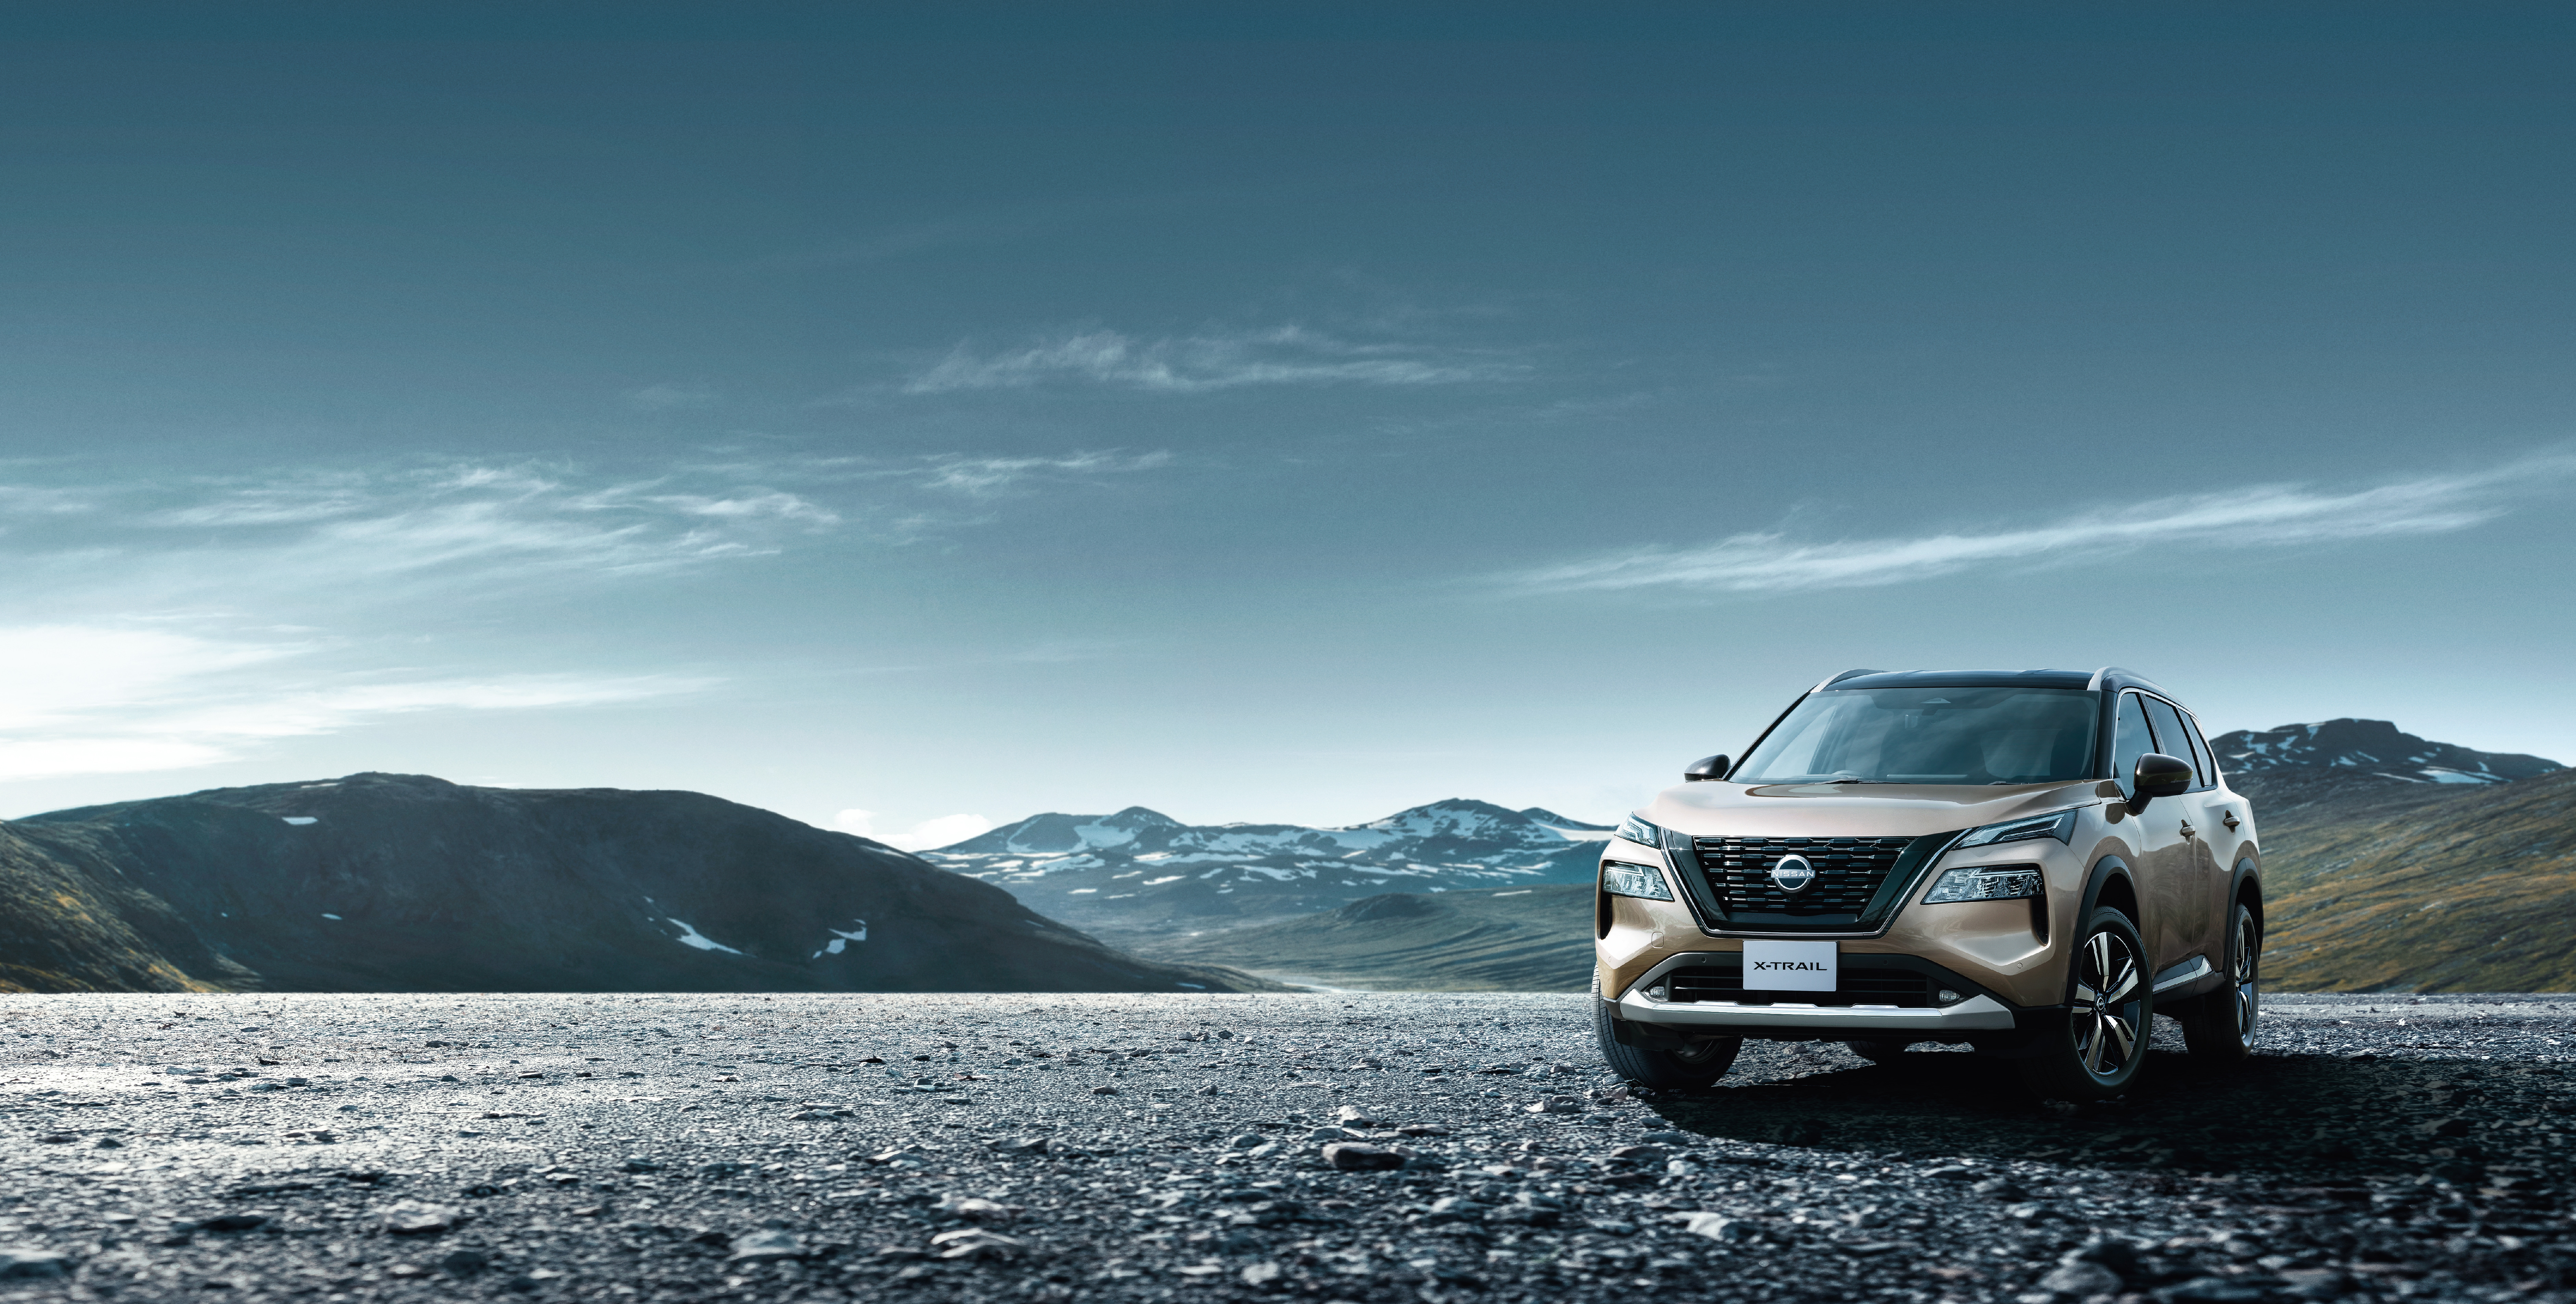 Vehicles Nissan X-Trail HD Wallpaper | Background Image